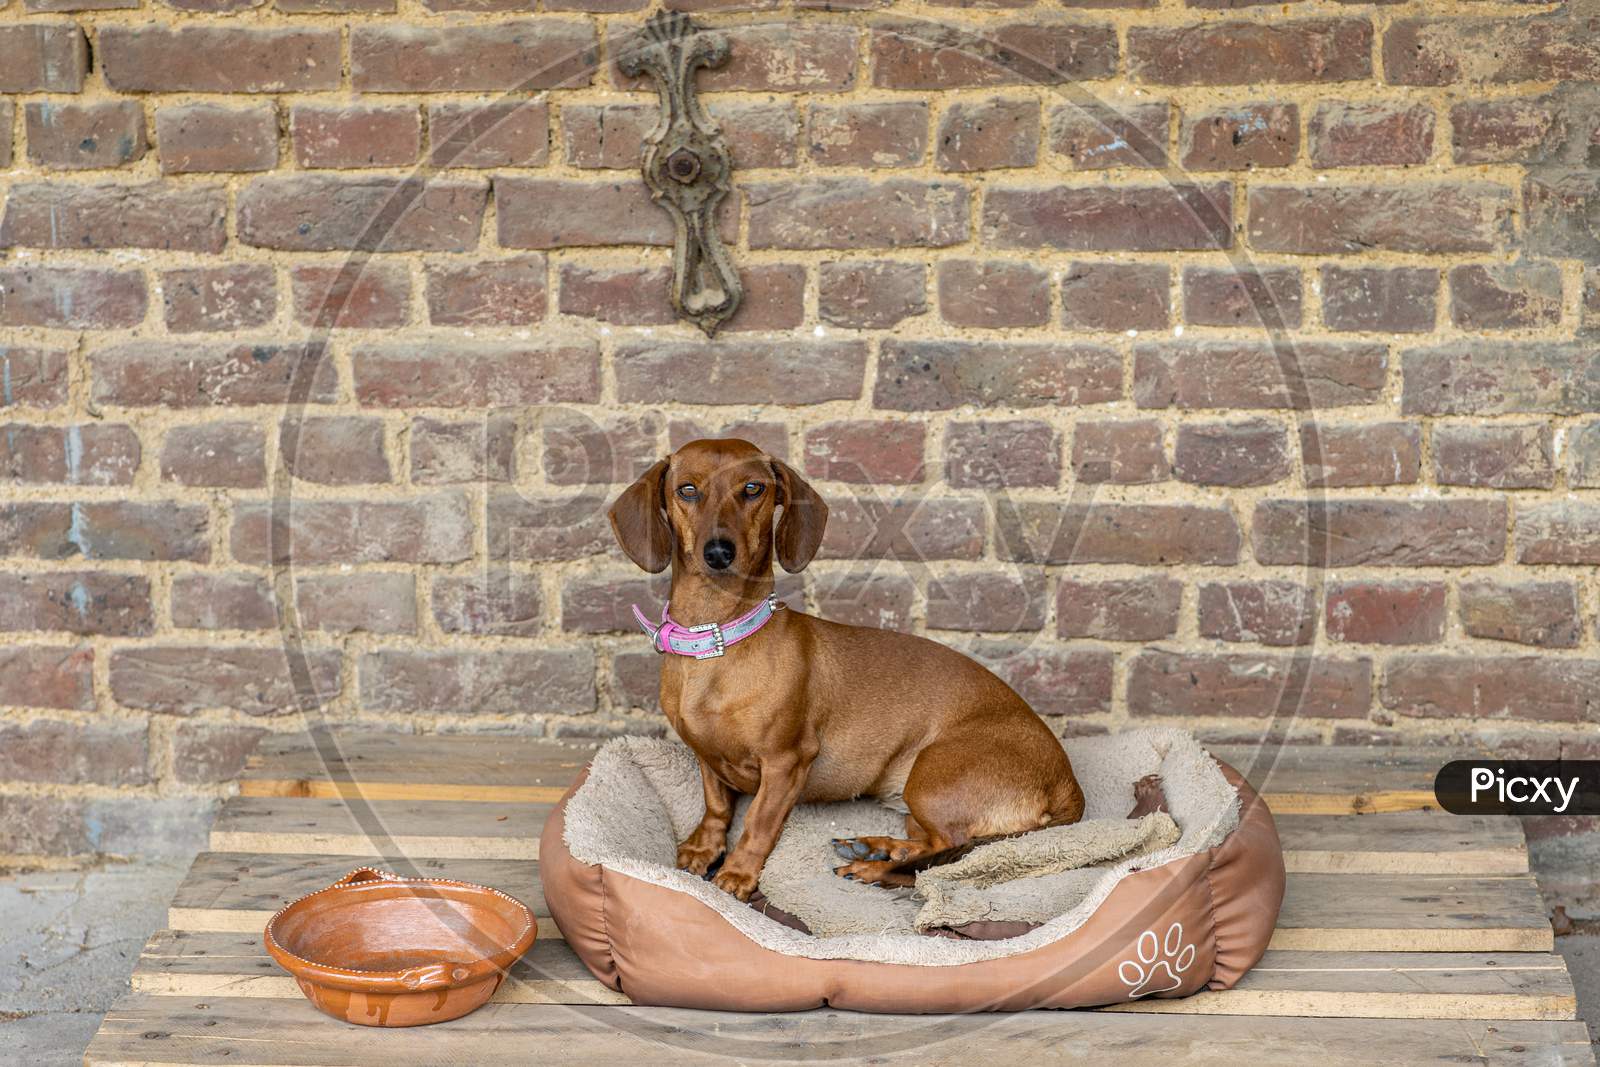 Brown Dachshund Dog Looking At The Camera Sitting On His Weathered Bed Next To A Clay Pot That Is On A Wooden Pallet With An Old Brick Wall With An Old Blacksmith Ornament In The Background